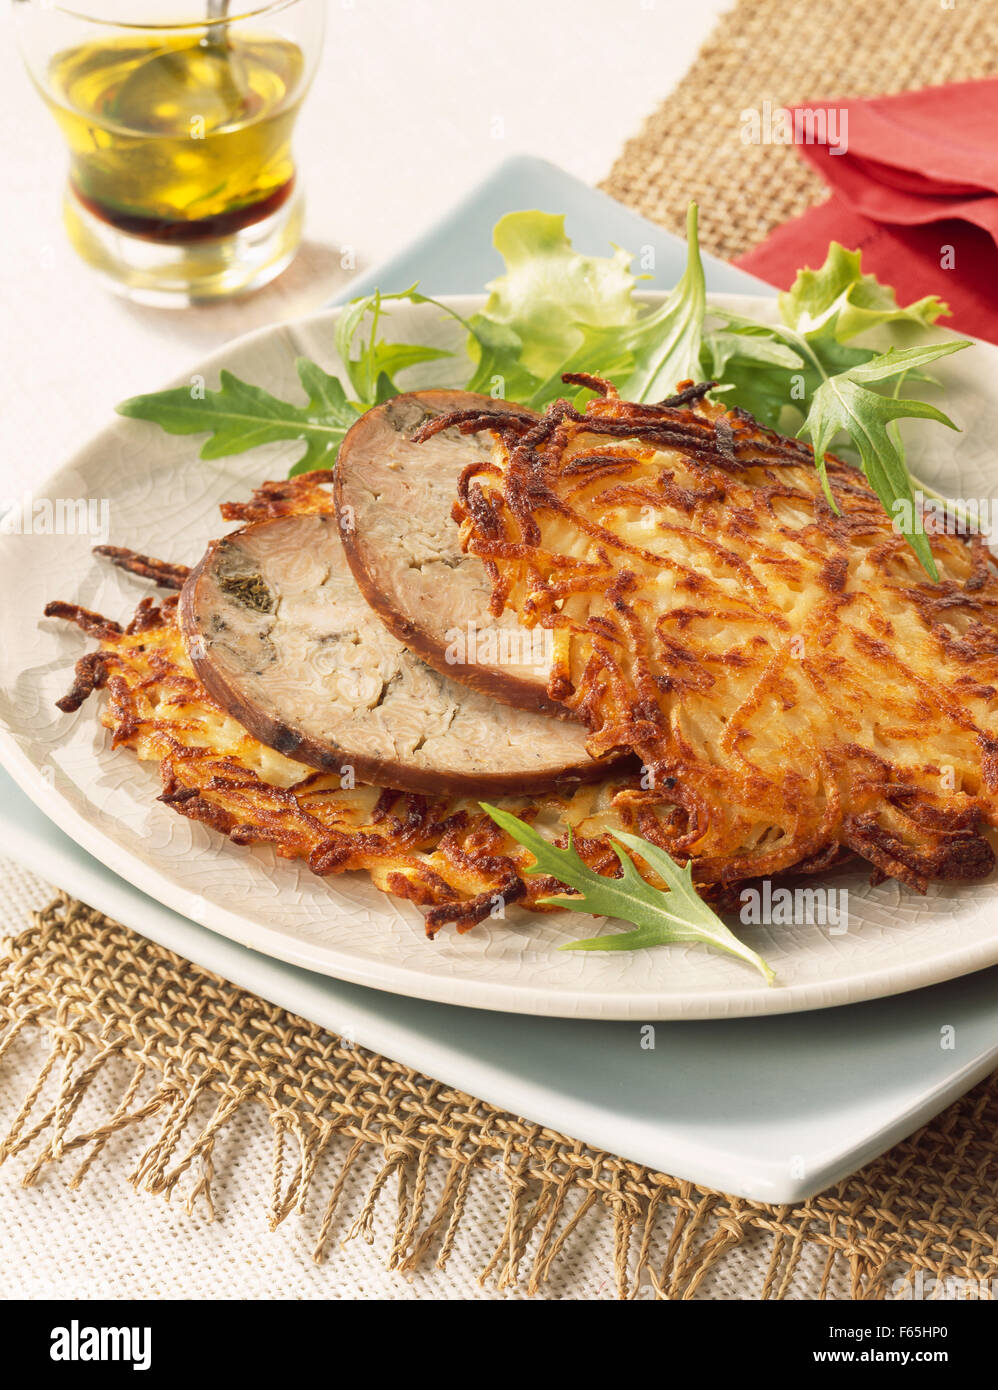 thin potato cakes with chitterlings sausage Stock Photo